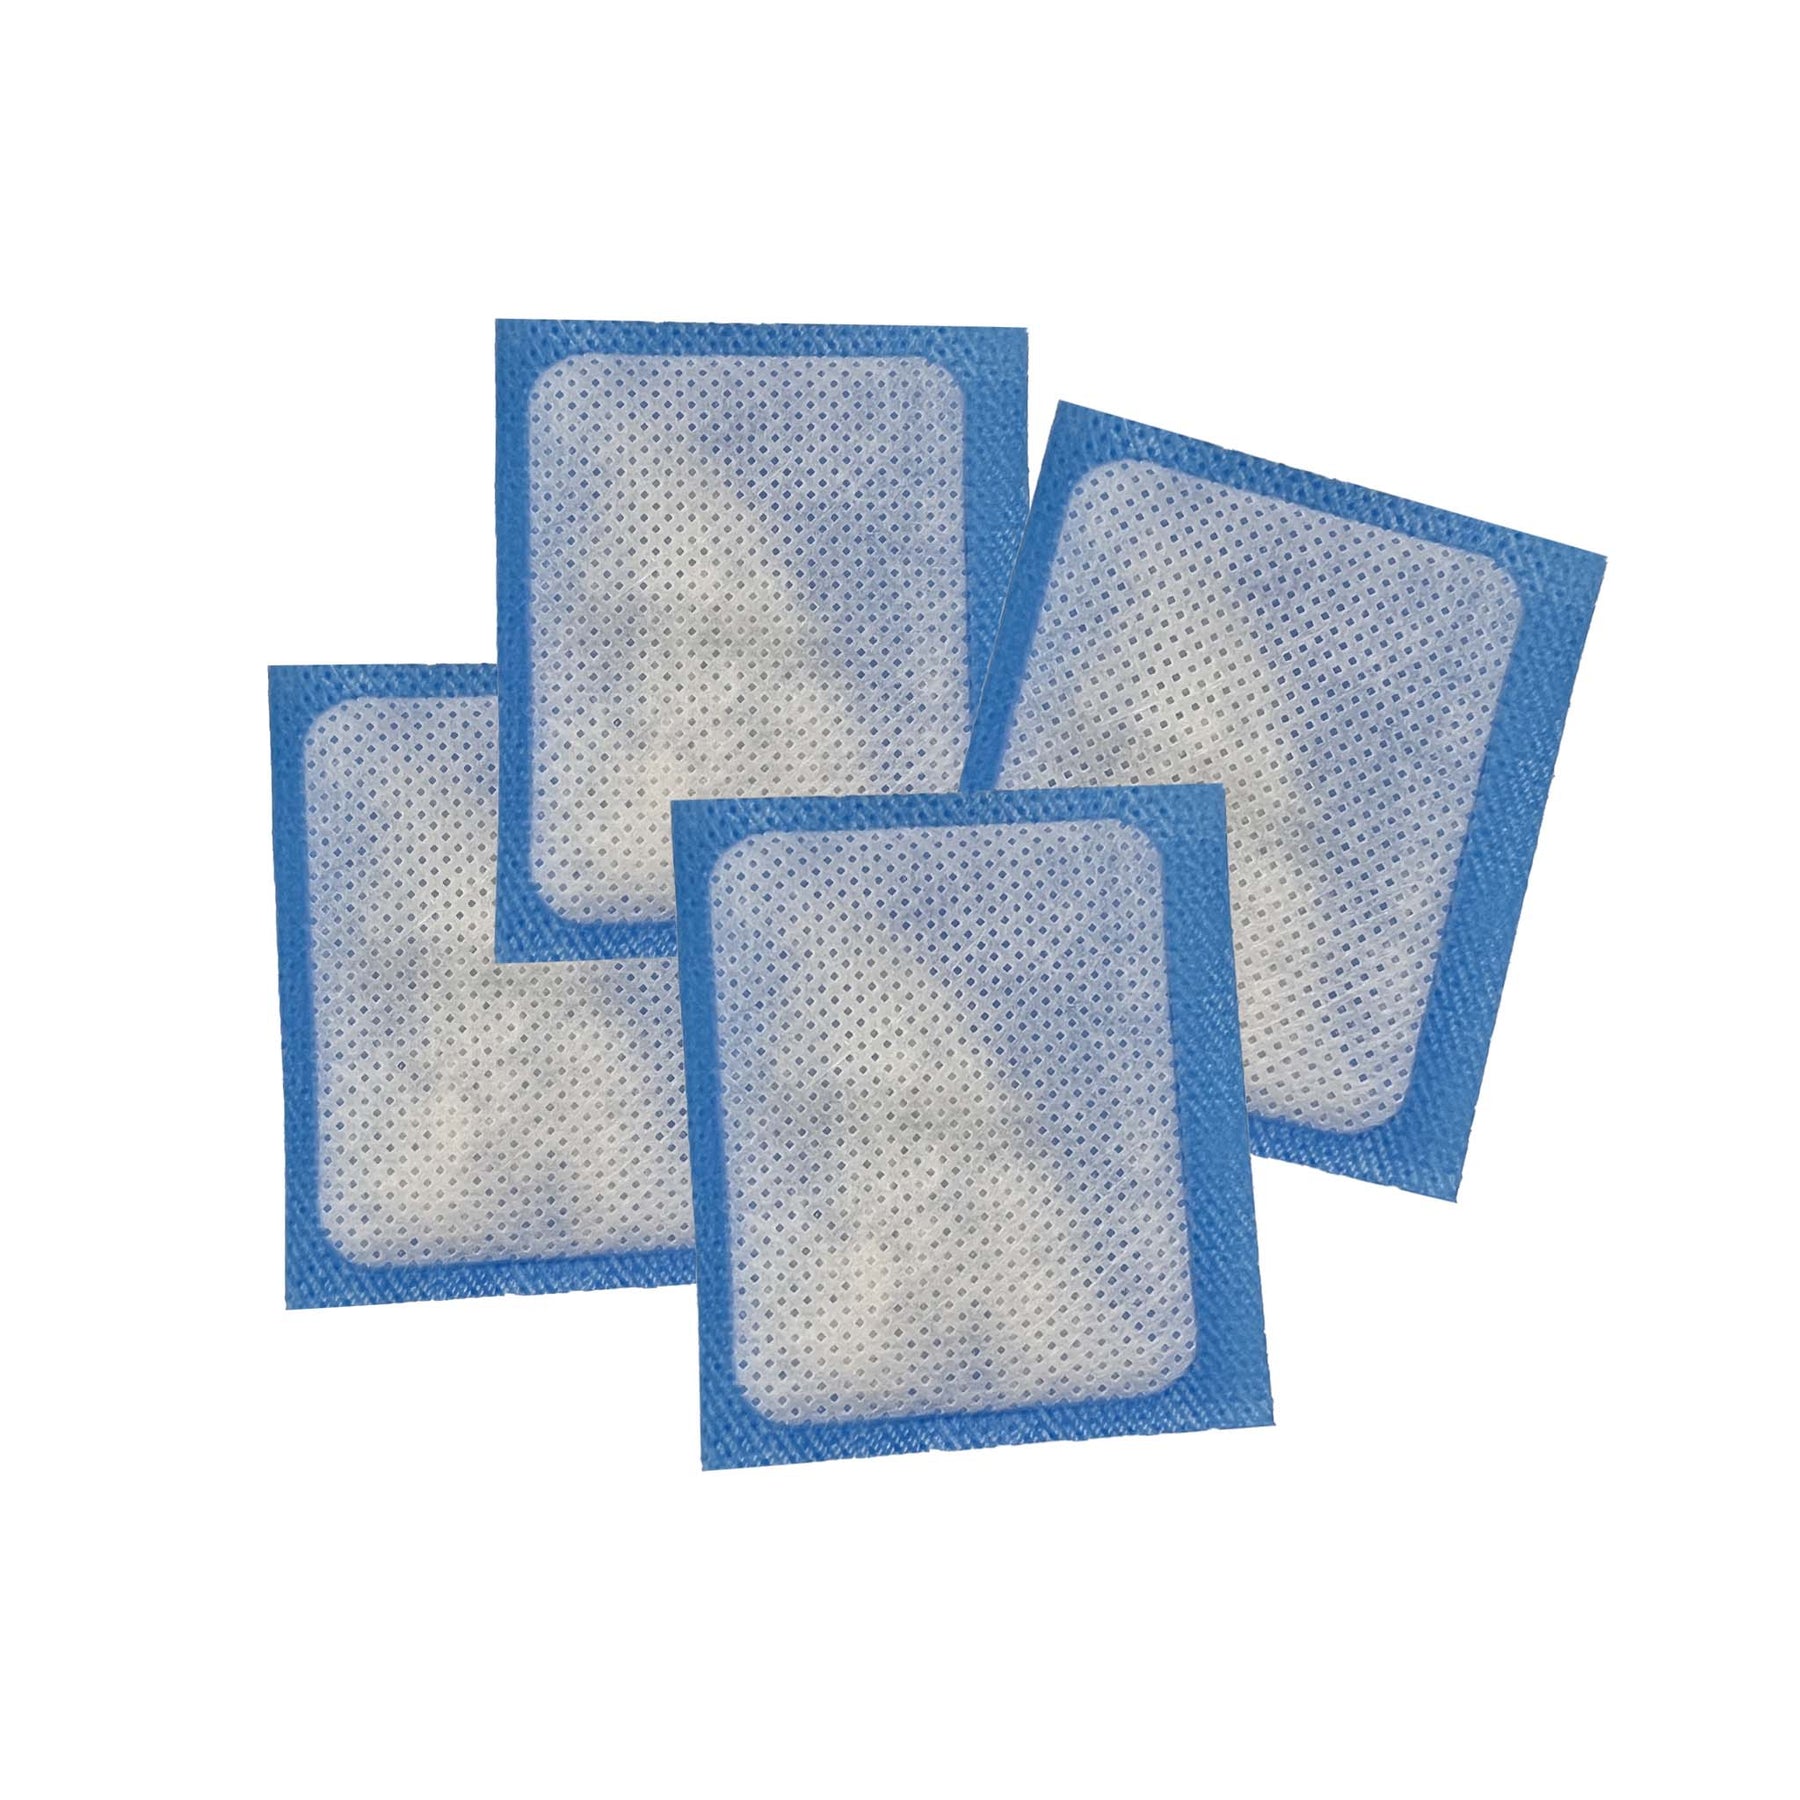 Stretto Cello Humidifier Replacement Bags, 4-Pack